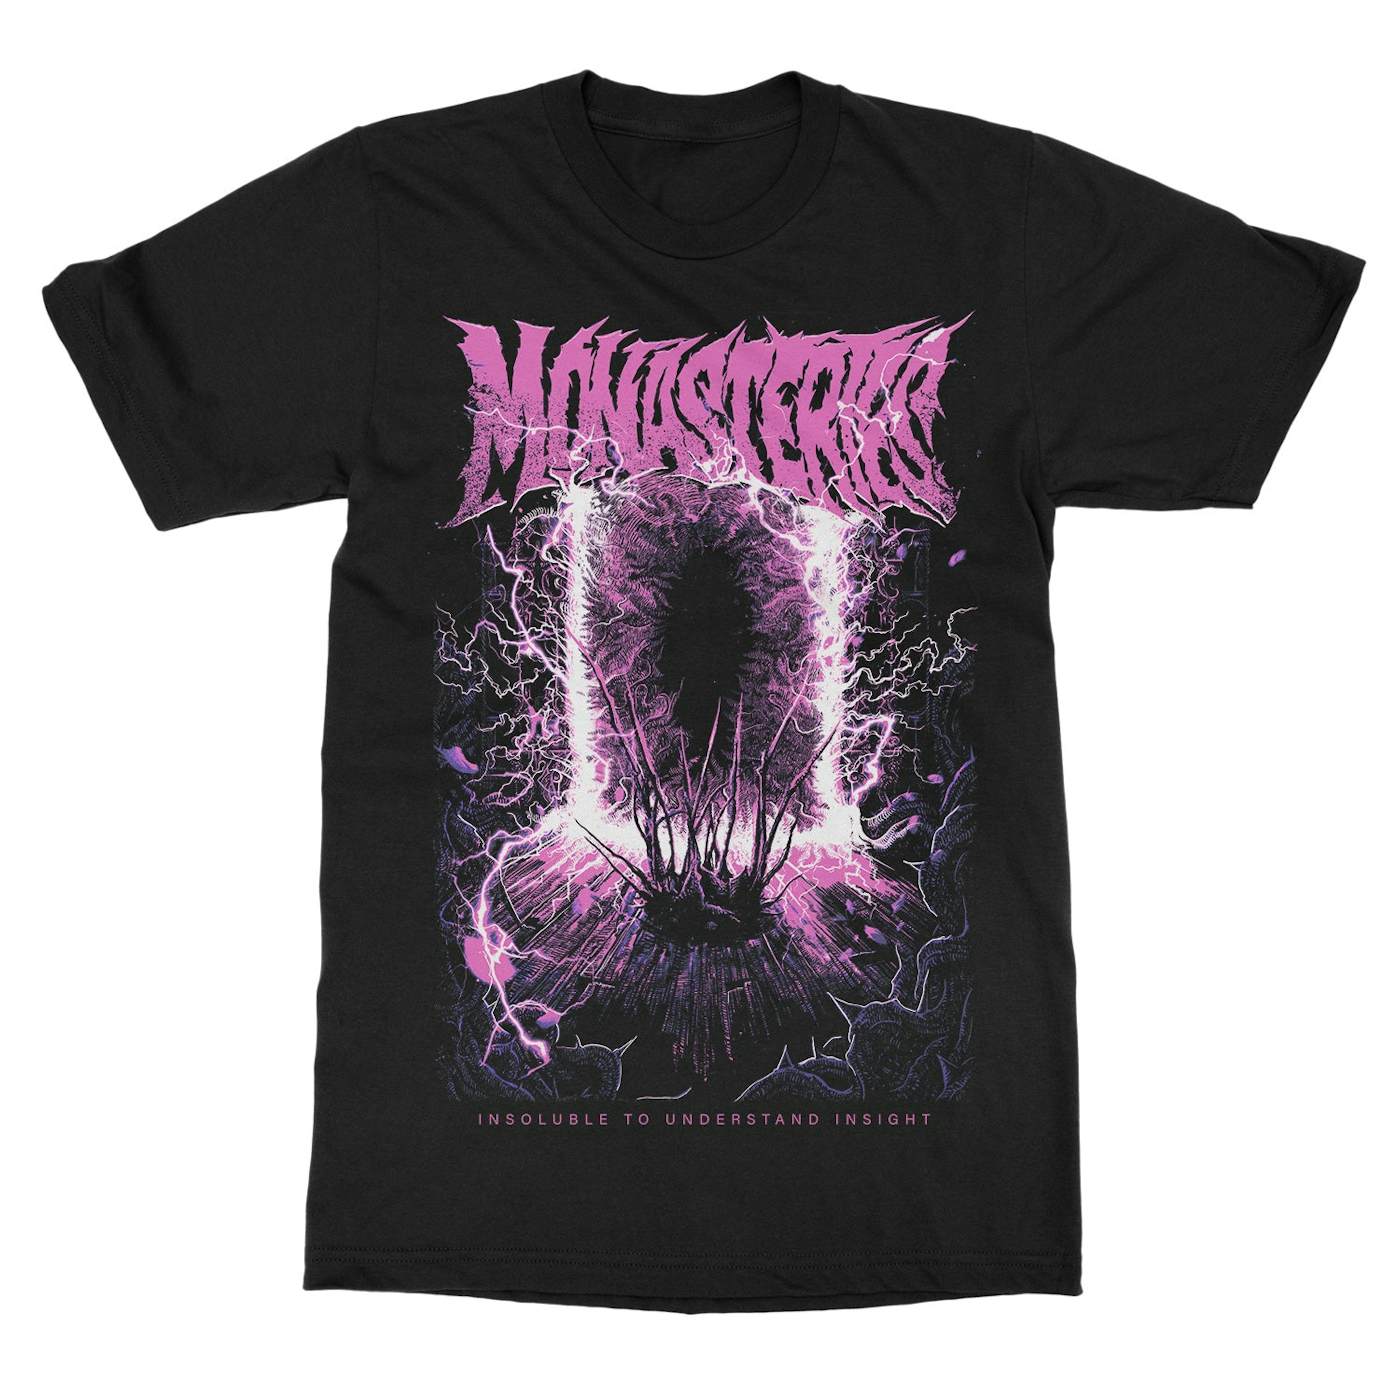 Monasteries "Insoluble" T-Shirt